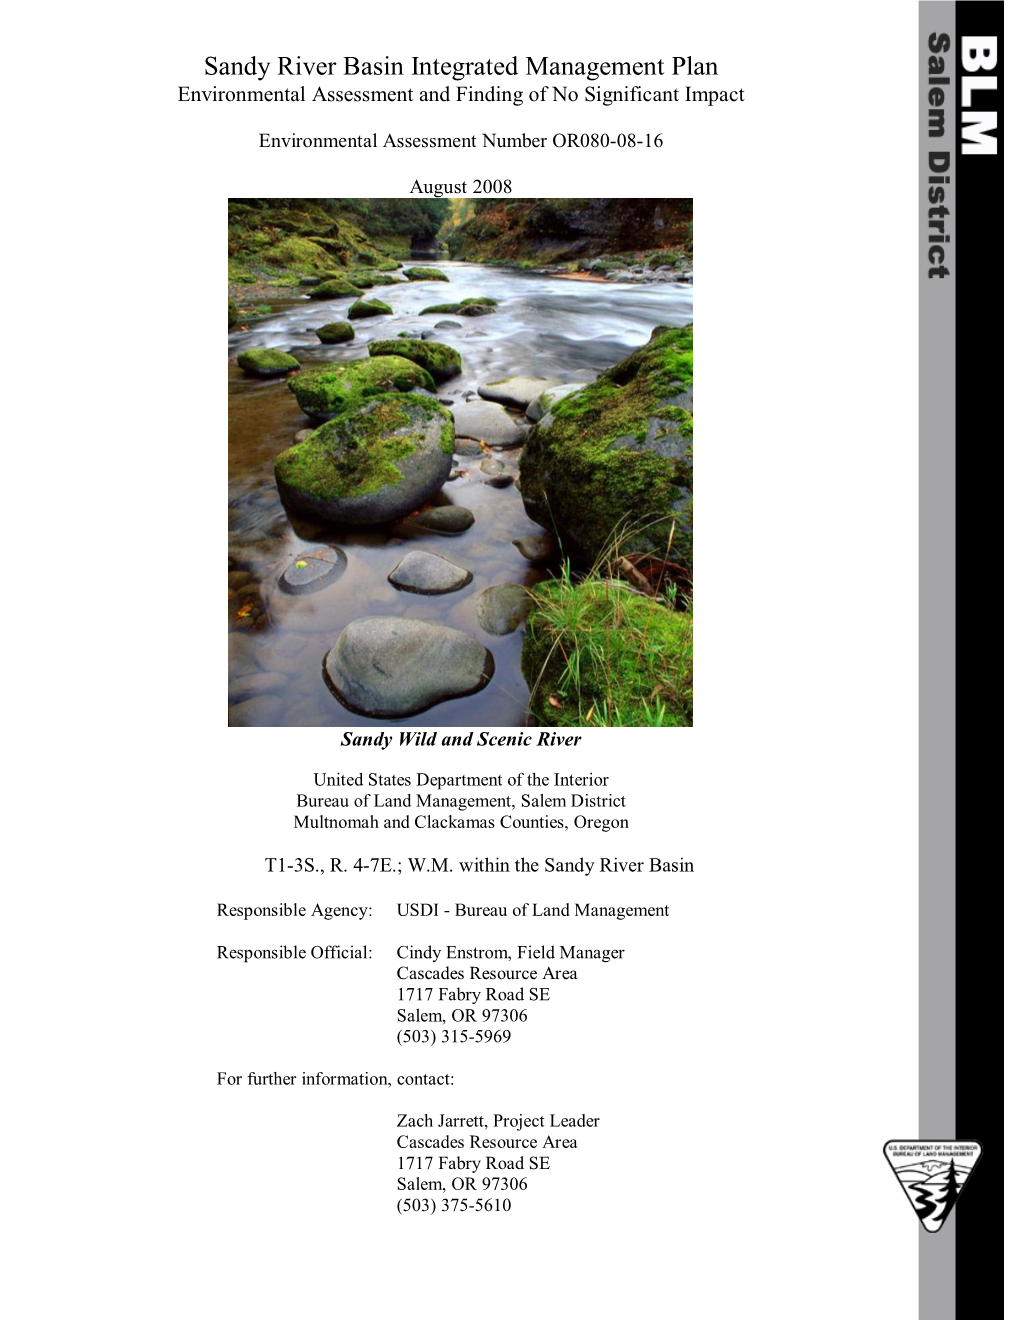 Sandy River Basin Integrated Management Plan Environmental Assessment and Finding of No Significant Impact